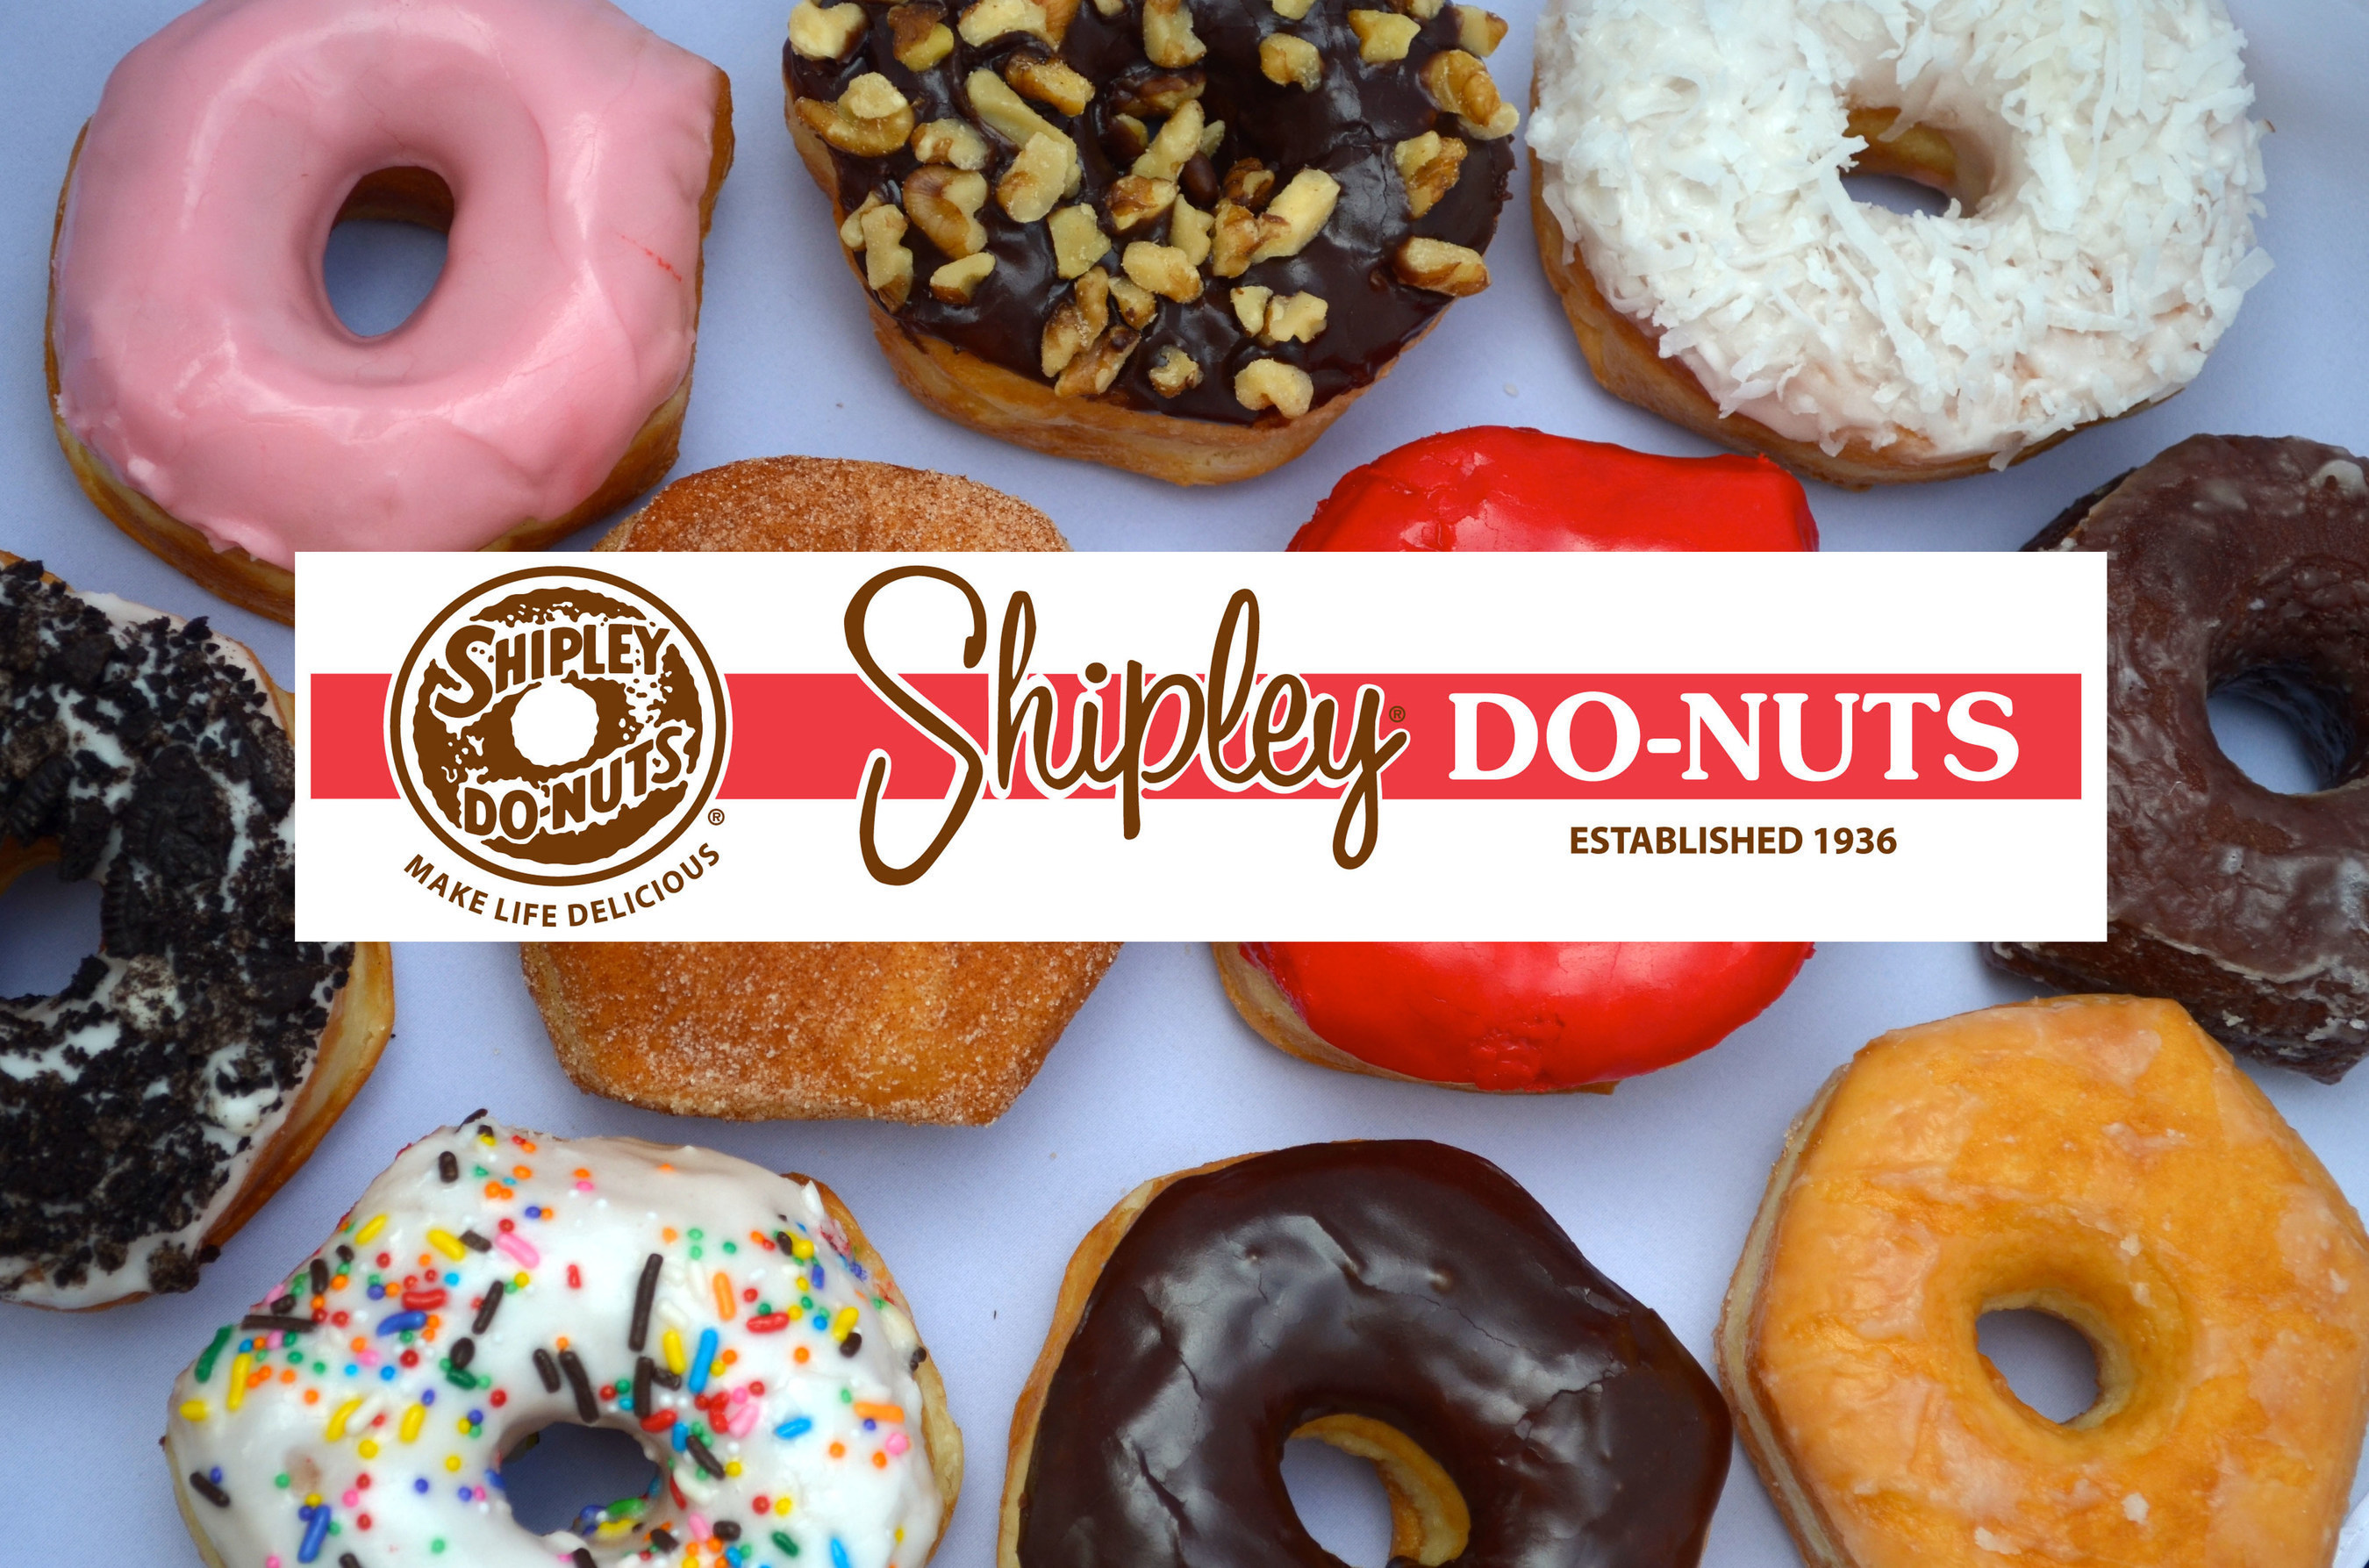 Shipley Do-Nuts -- Making Life Delicious since 1936 with over 250 locations in the US (PRNewsFoto/Shipley Do-Nuts)